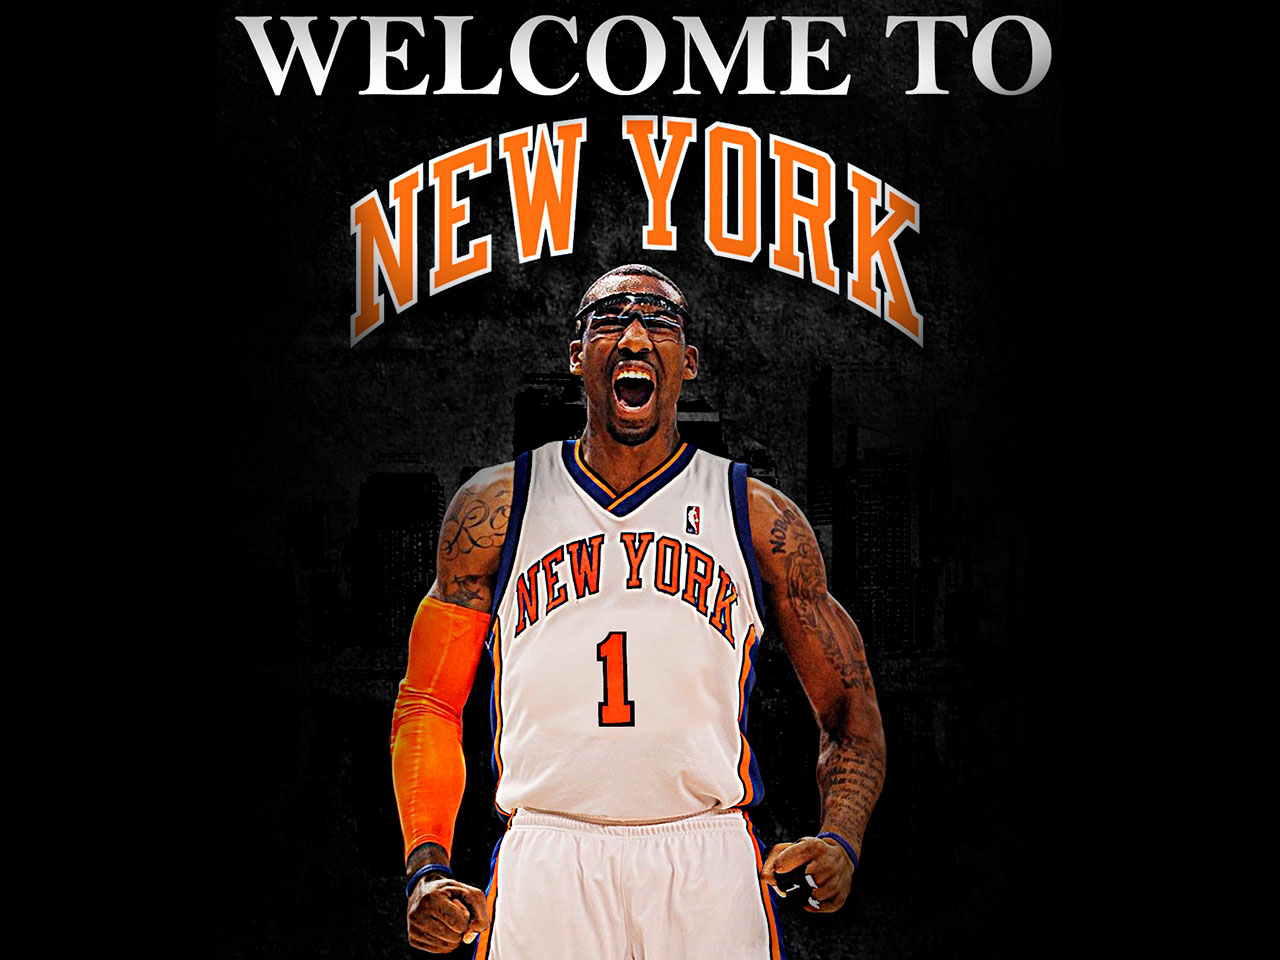 Amare-Stoudemire-Welcome-To-New-York-Wallpaper.jpg